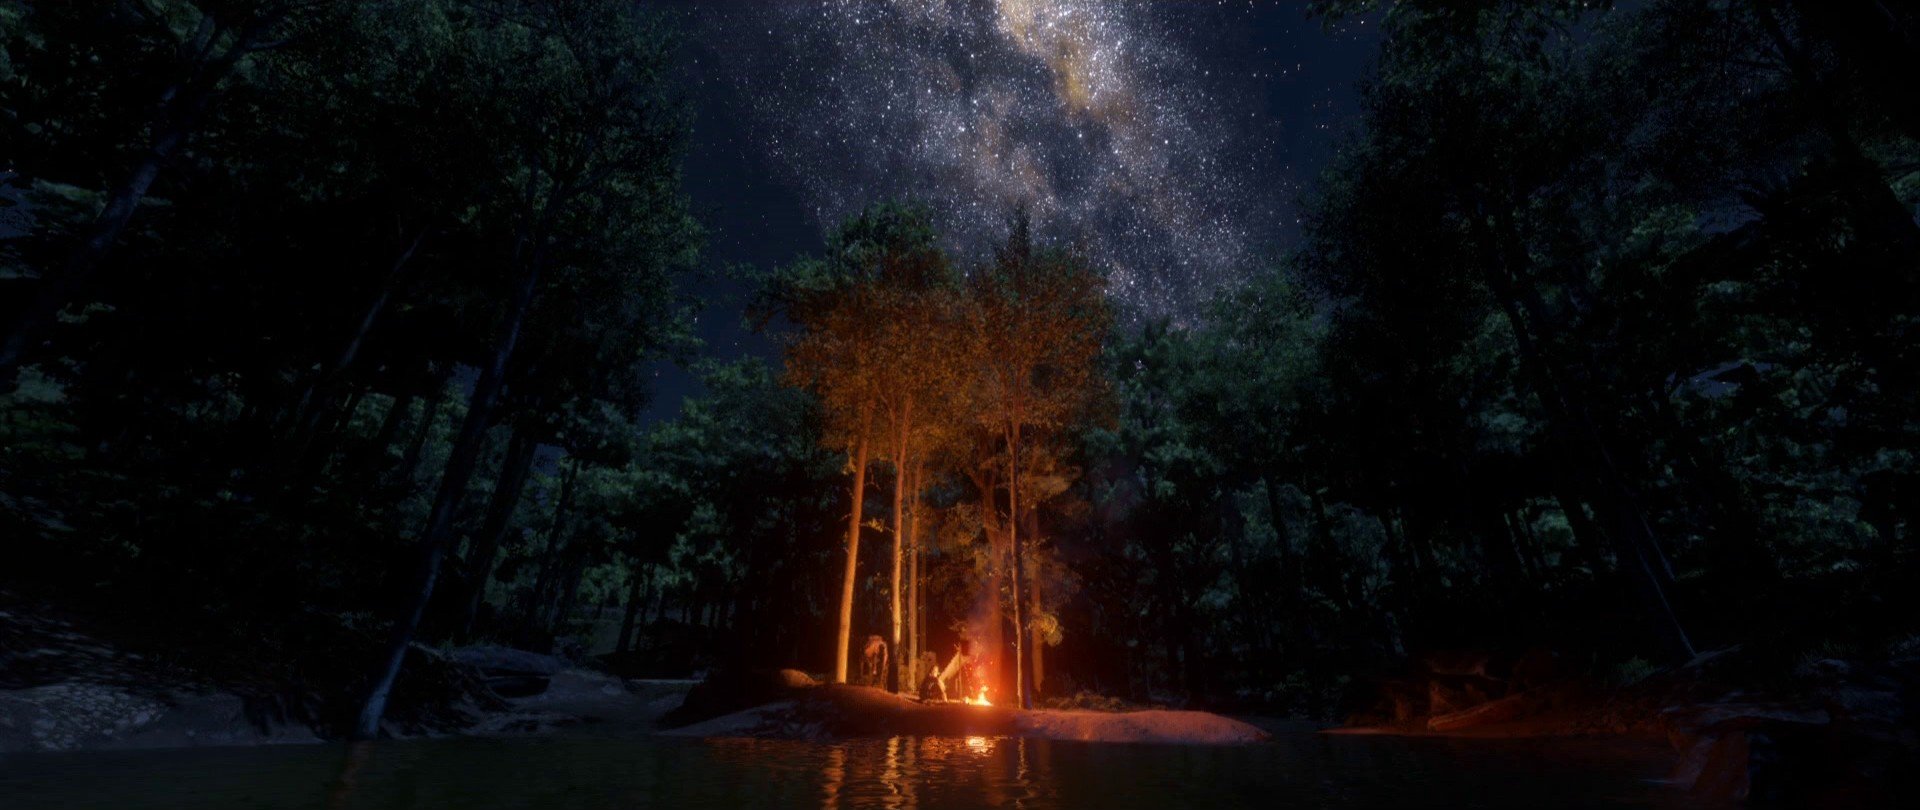 Rockstar Games, Red Dead Redemption 2, Forest, In game, Star trails, Night  sky, Campfire, Stars HD Wallpapers / Desktop and Mobile Images & Photos